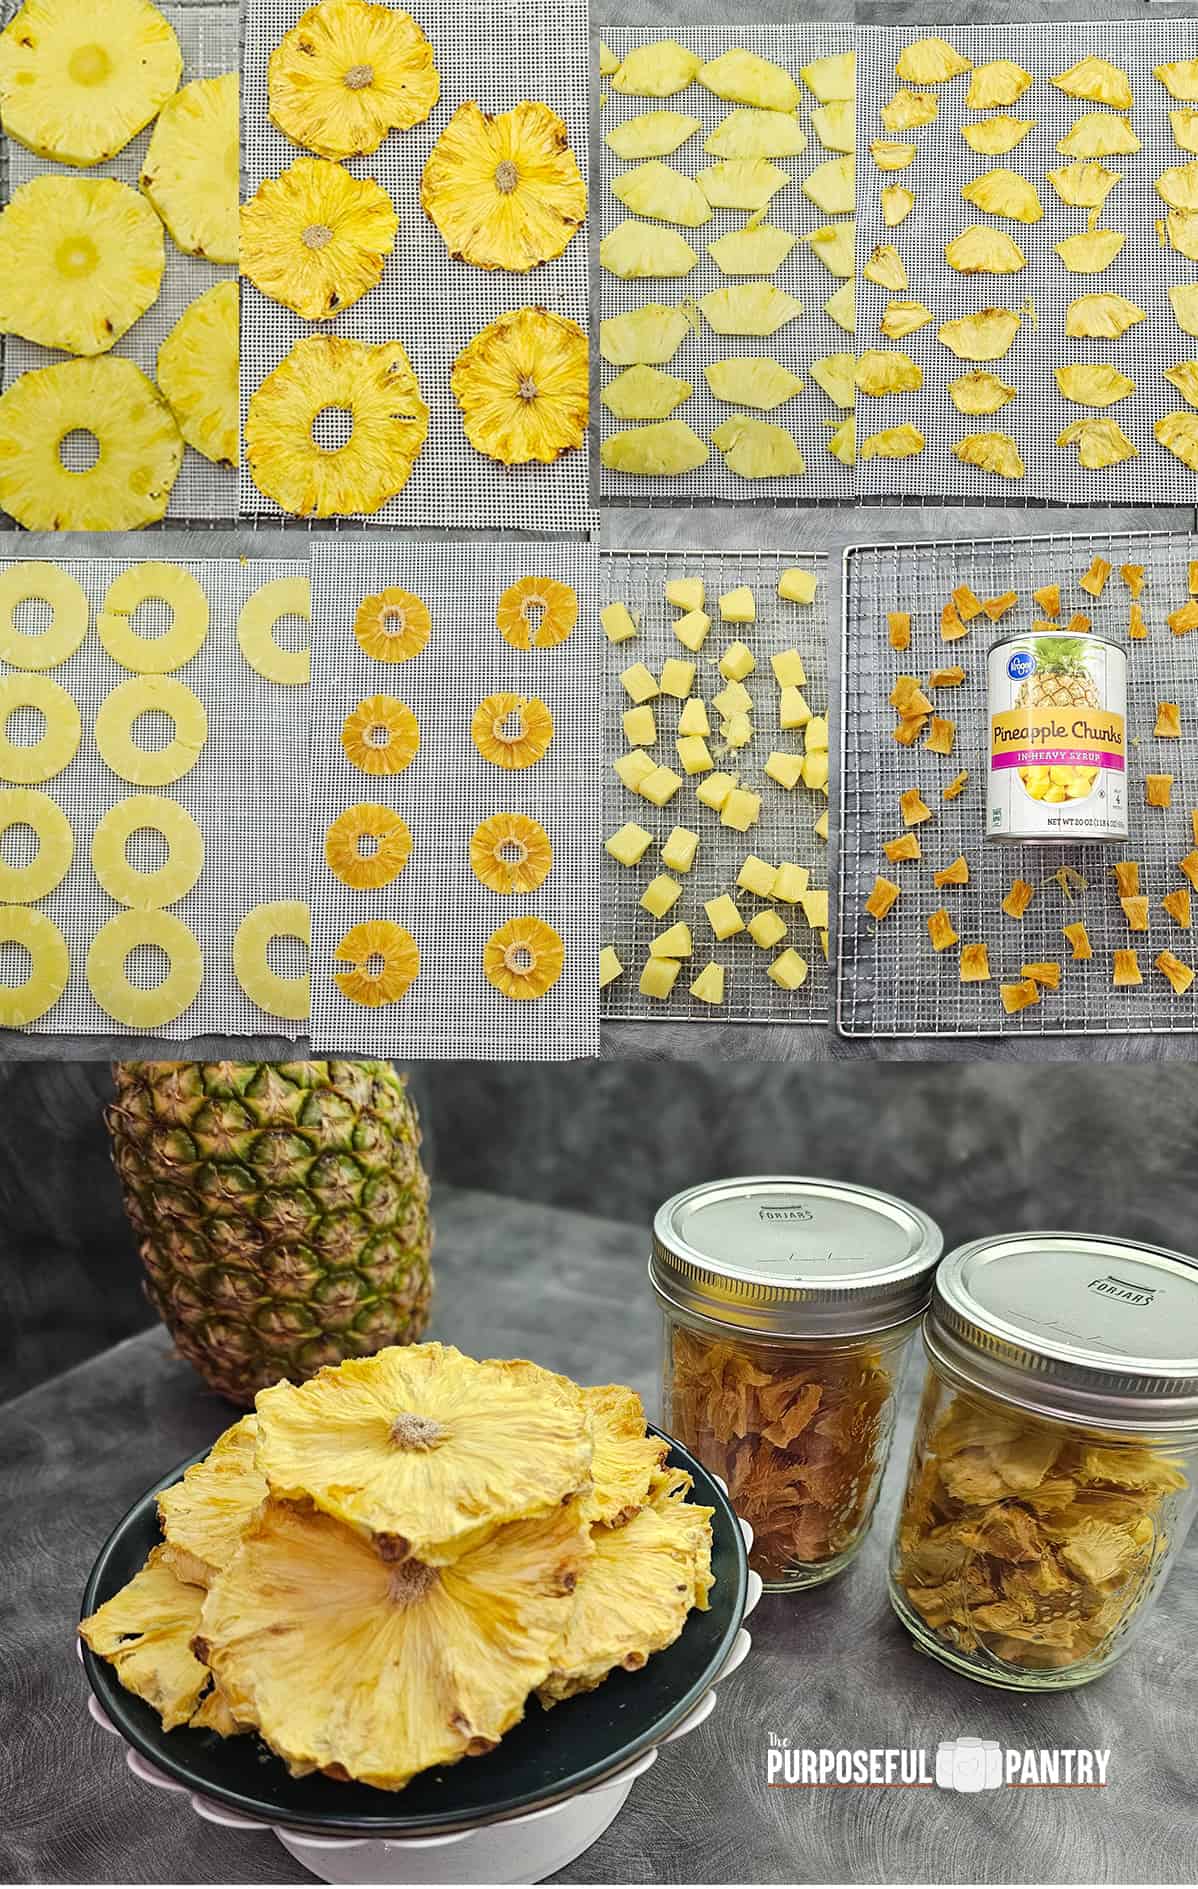 Before and after shots of dehydrating pineapple on Cosori dehydrator trays.